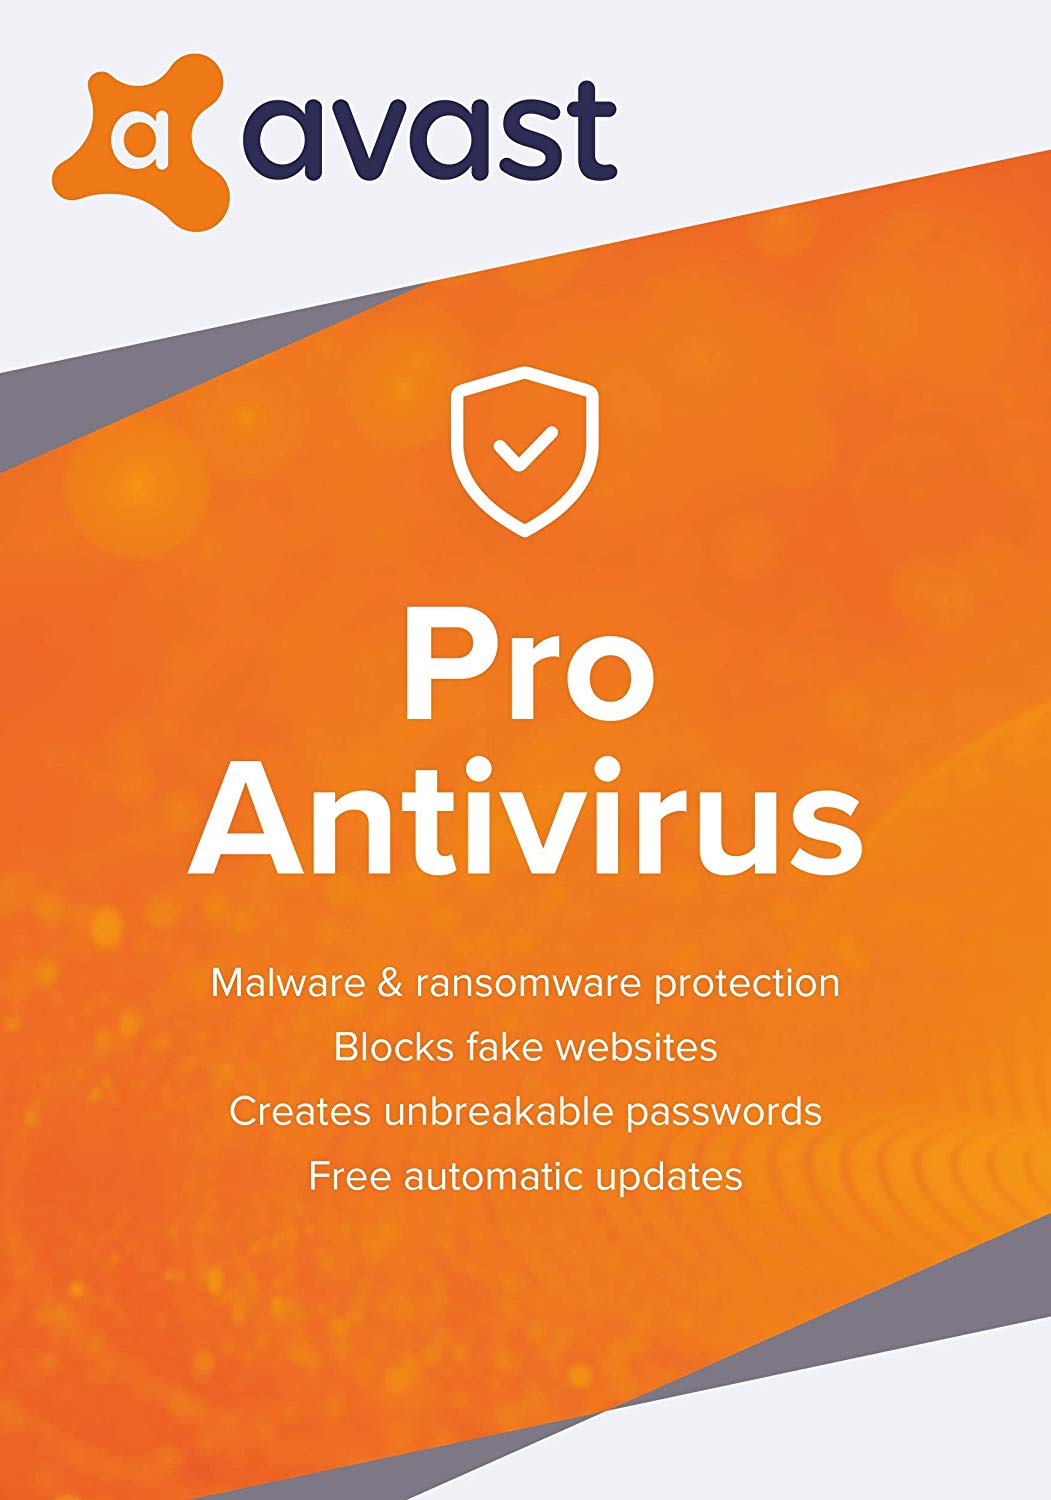 Avast Pro AntiVirus CD Key (Digital Download) - Various Options Available: Unlimited Devices